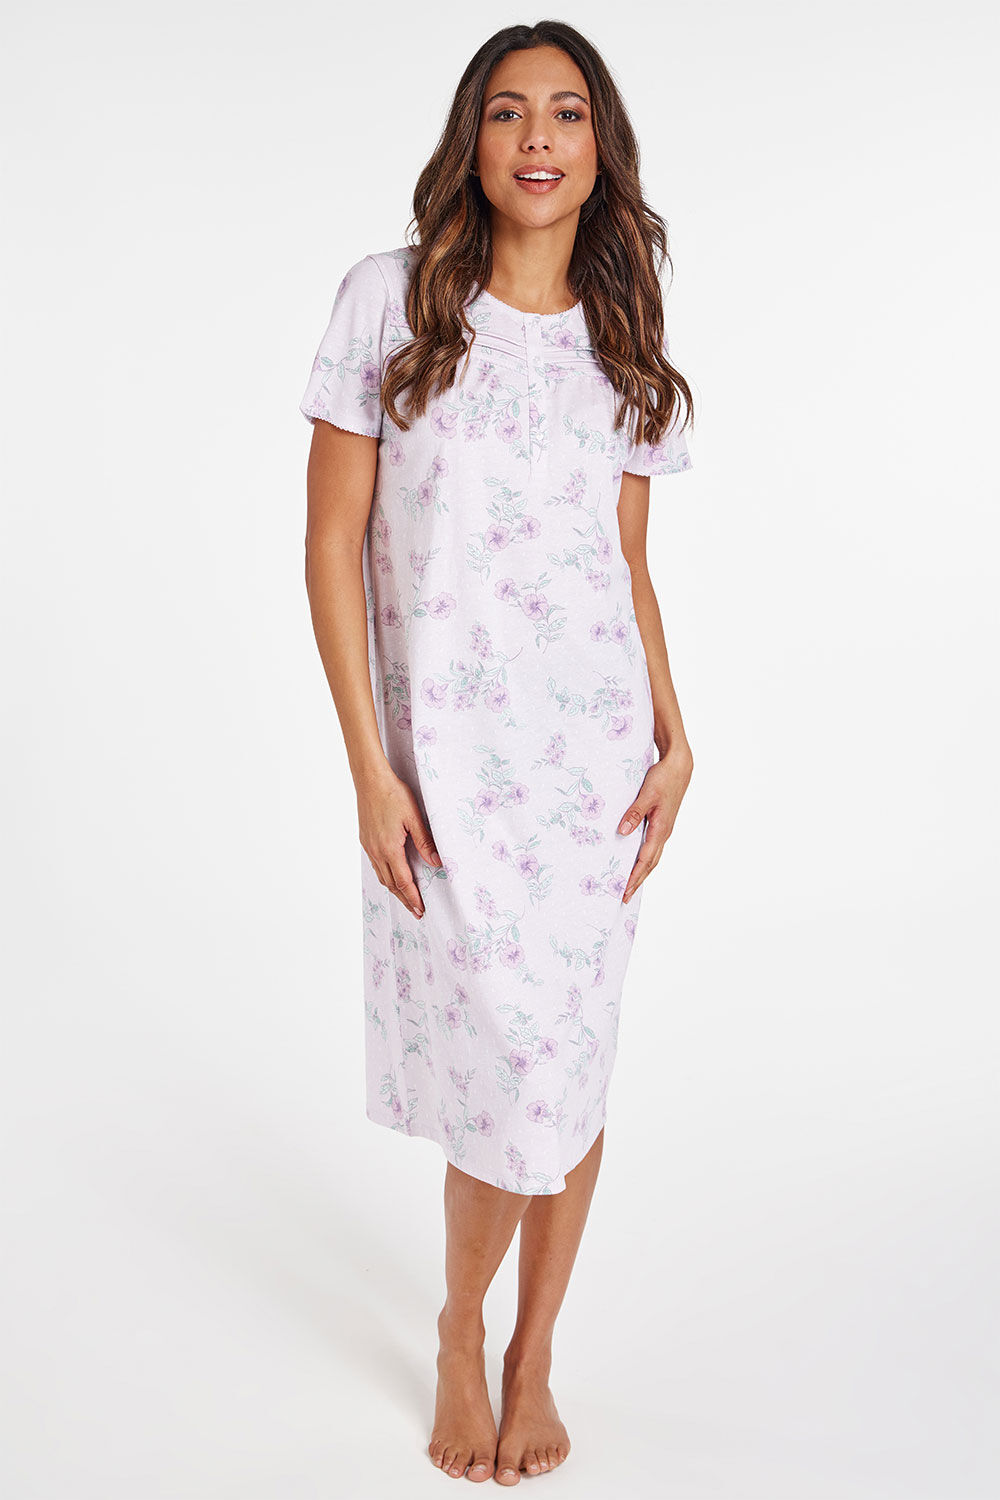 Bonmarche Lilac Short Sleeve Floral and Spot Print Nightdress, Size: 24-26